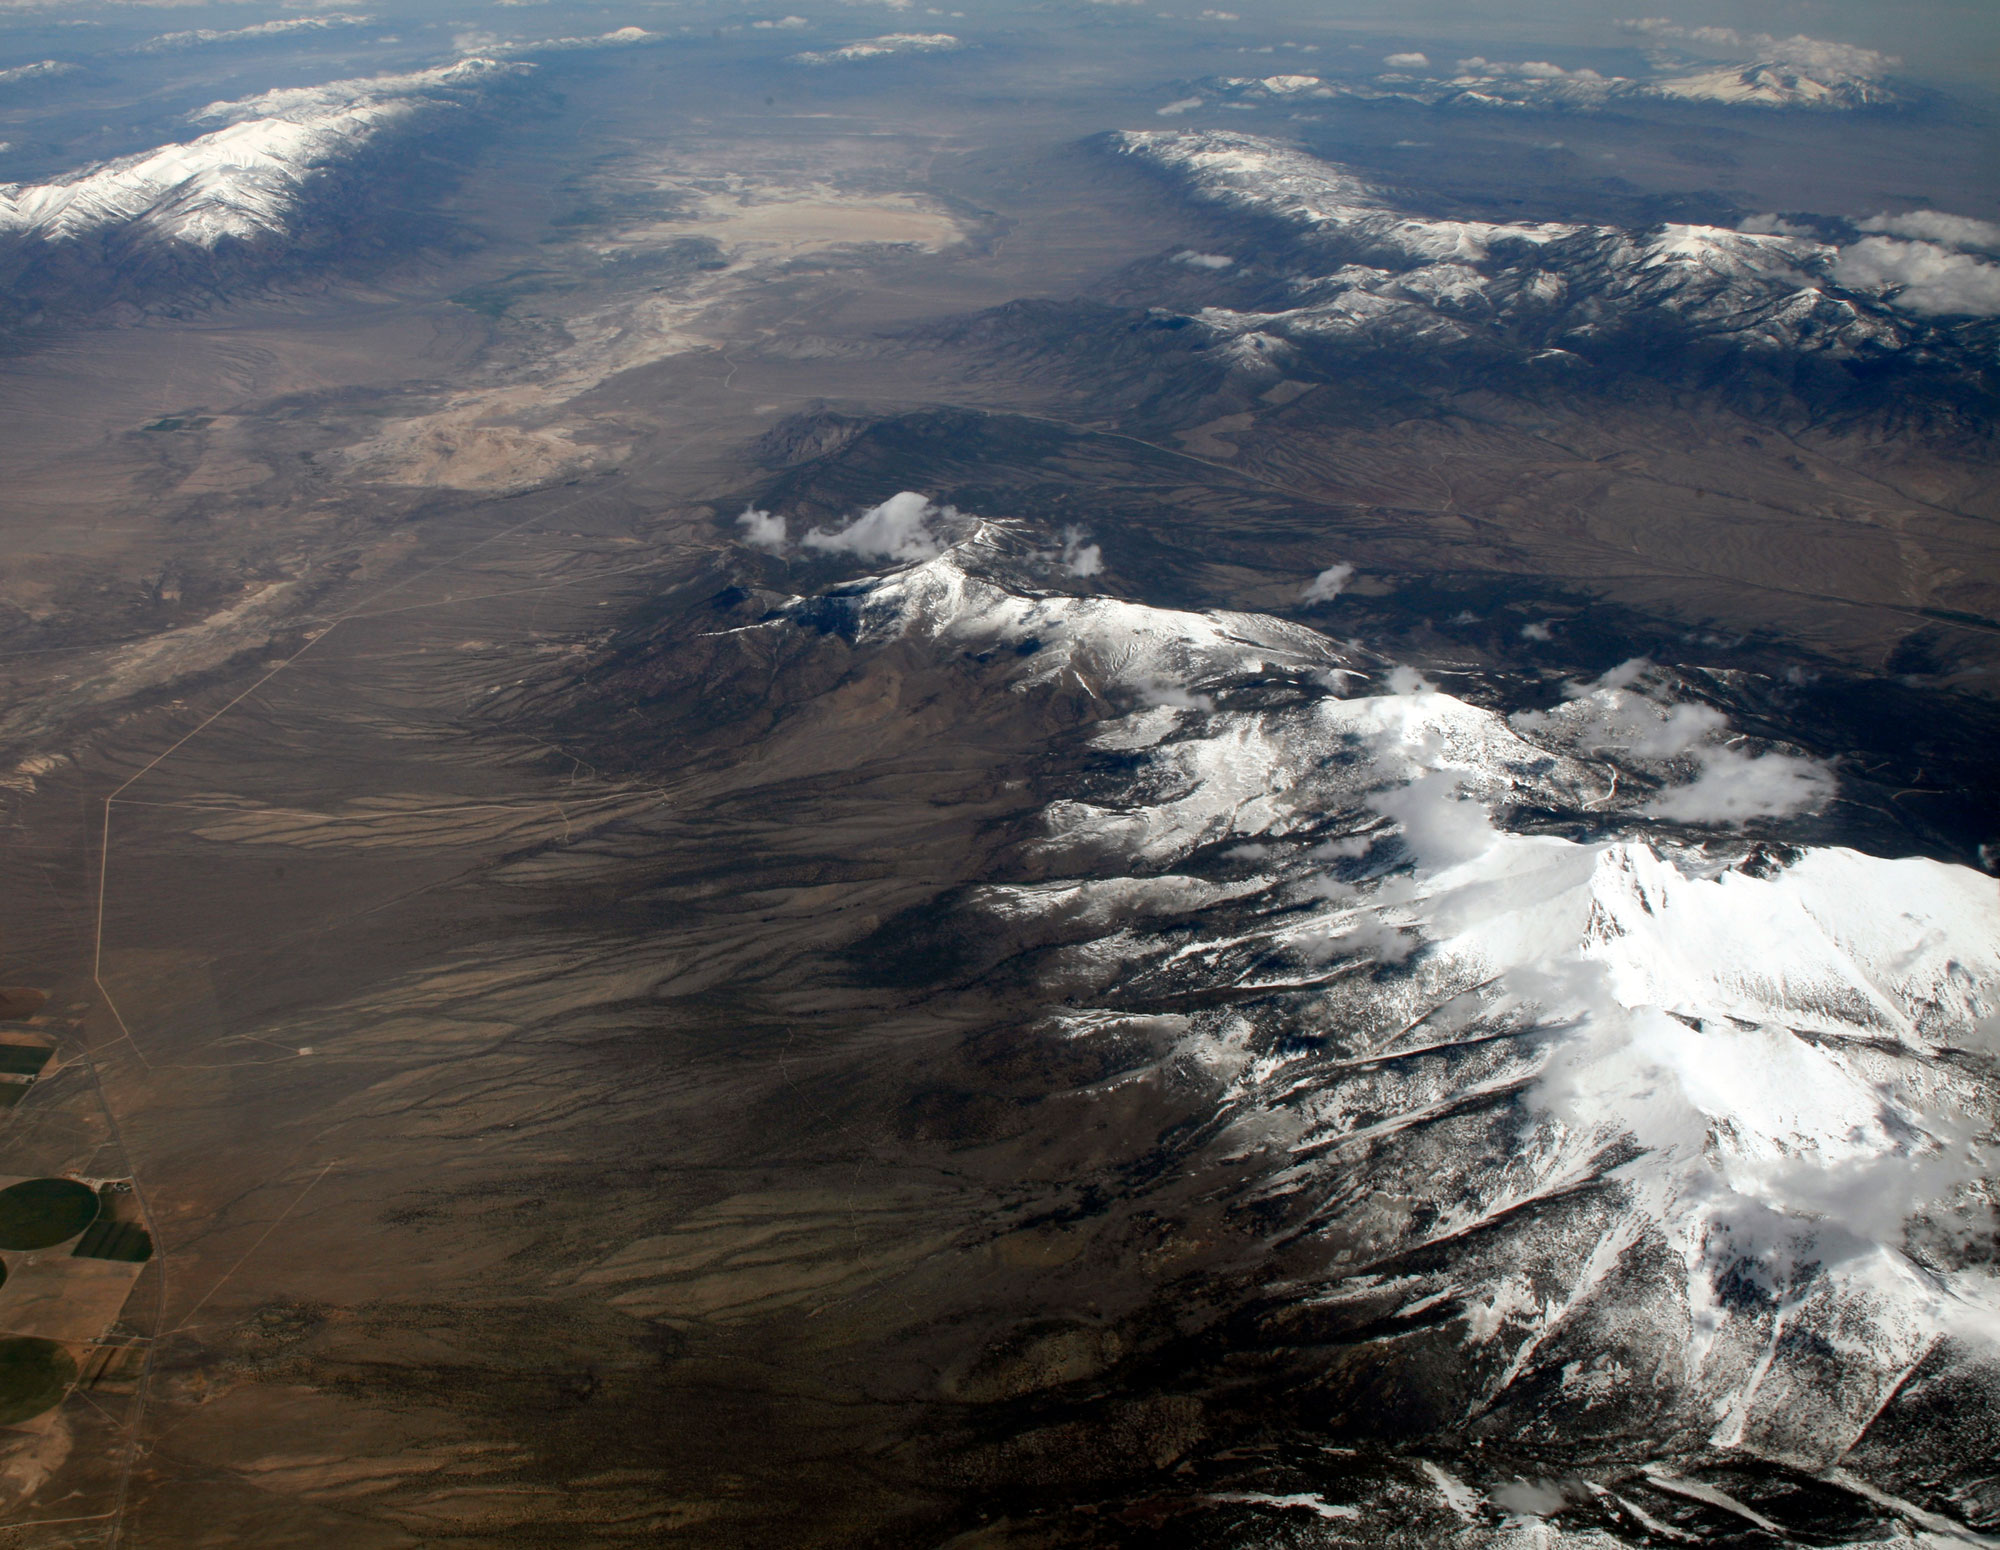 Aerial photograph of Wheeler Peak in Great Basin National Park, Nevada. The photo shows a dry landscape with mountain chains separated by basins. The mountain peaks are covered with snow.